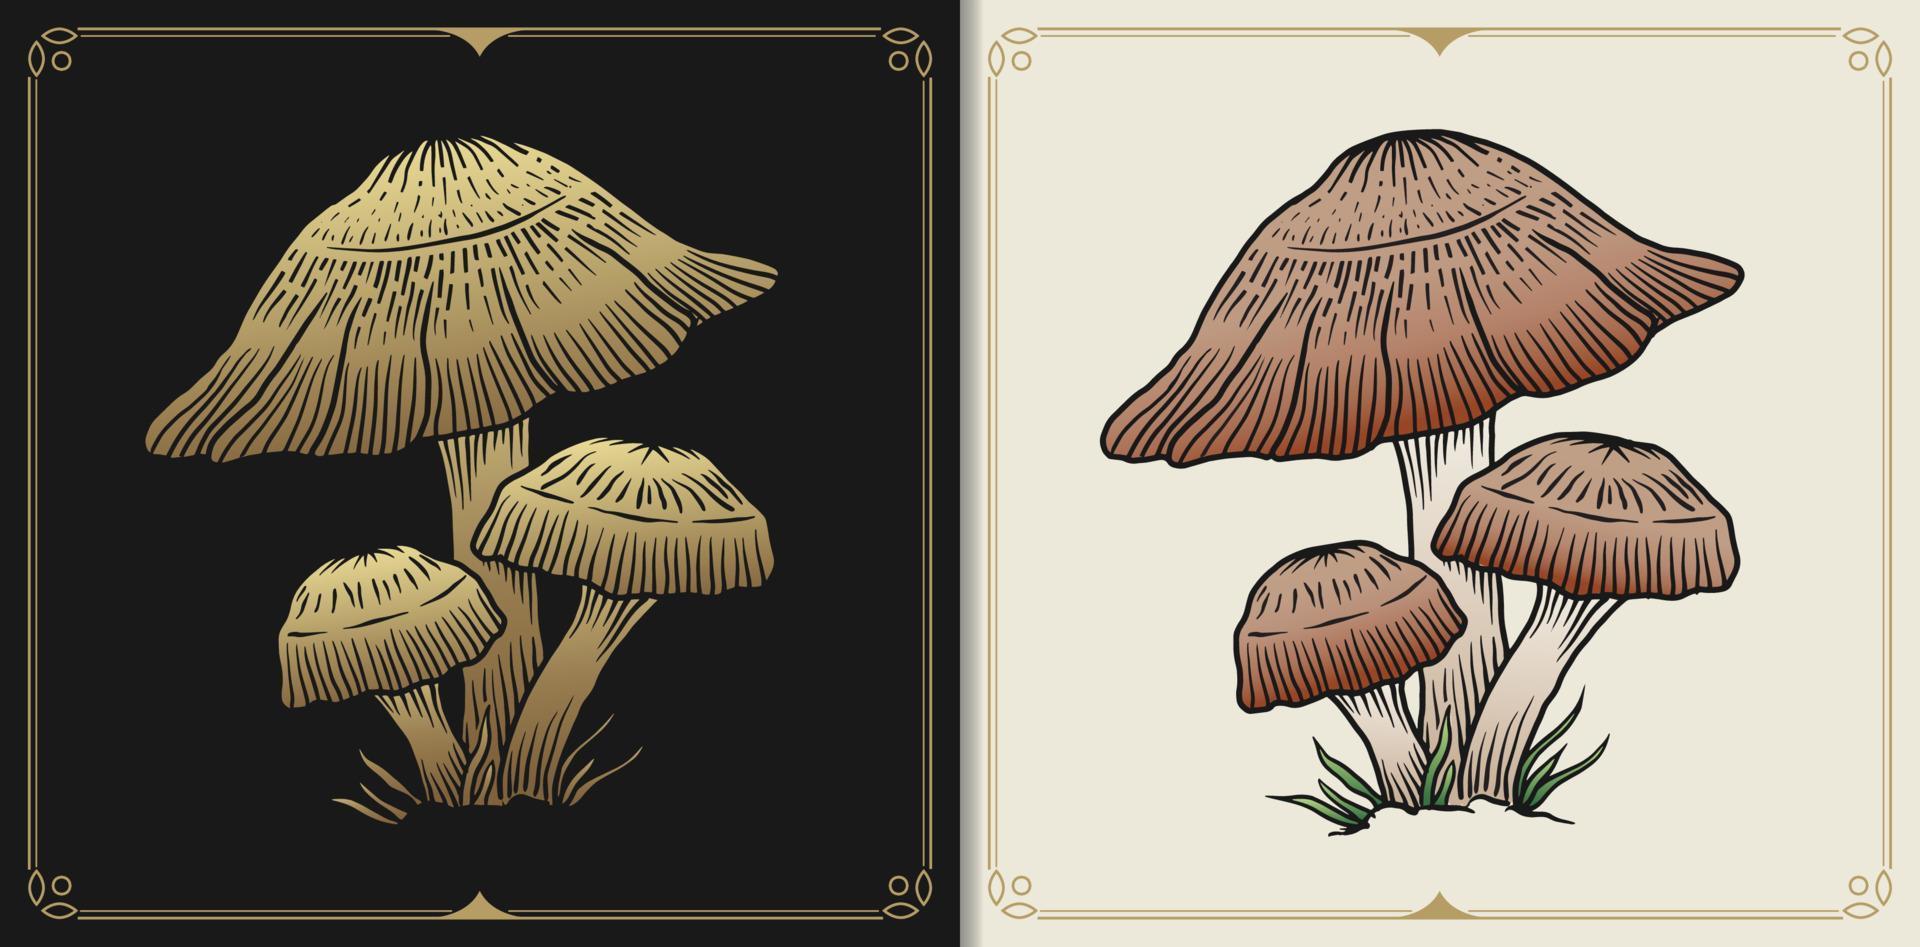 Mushroom with engraving, hand drawn, luxury, celestial, esoteric, boho style, fit for spiritualist, religious, paranormal, tarot reader, astrologer or tattoo vector